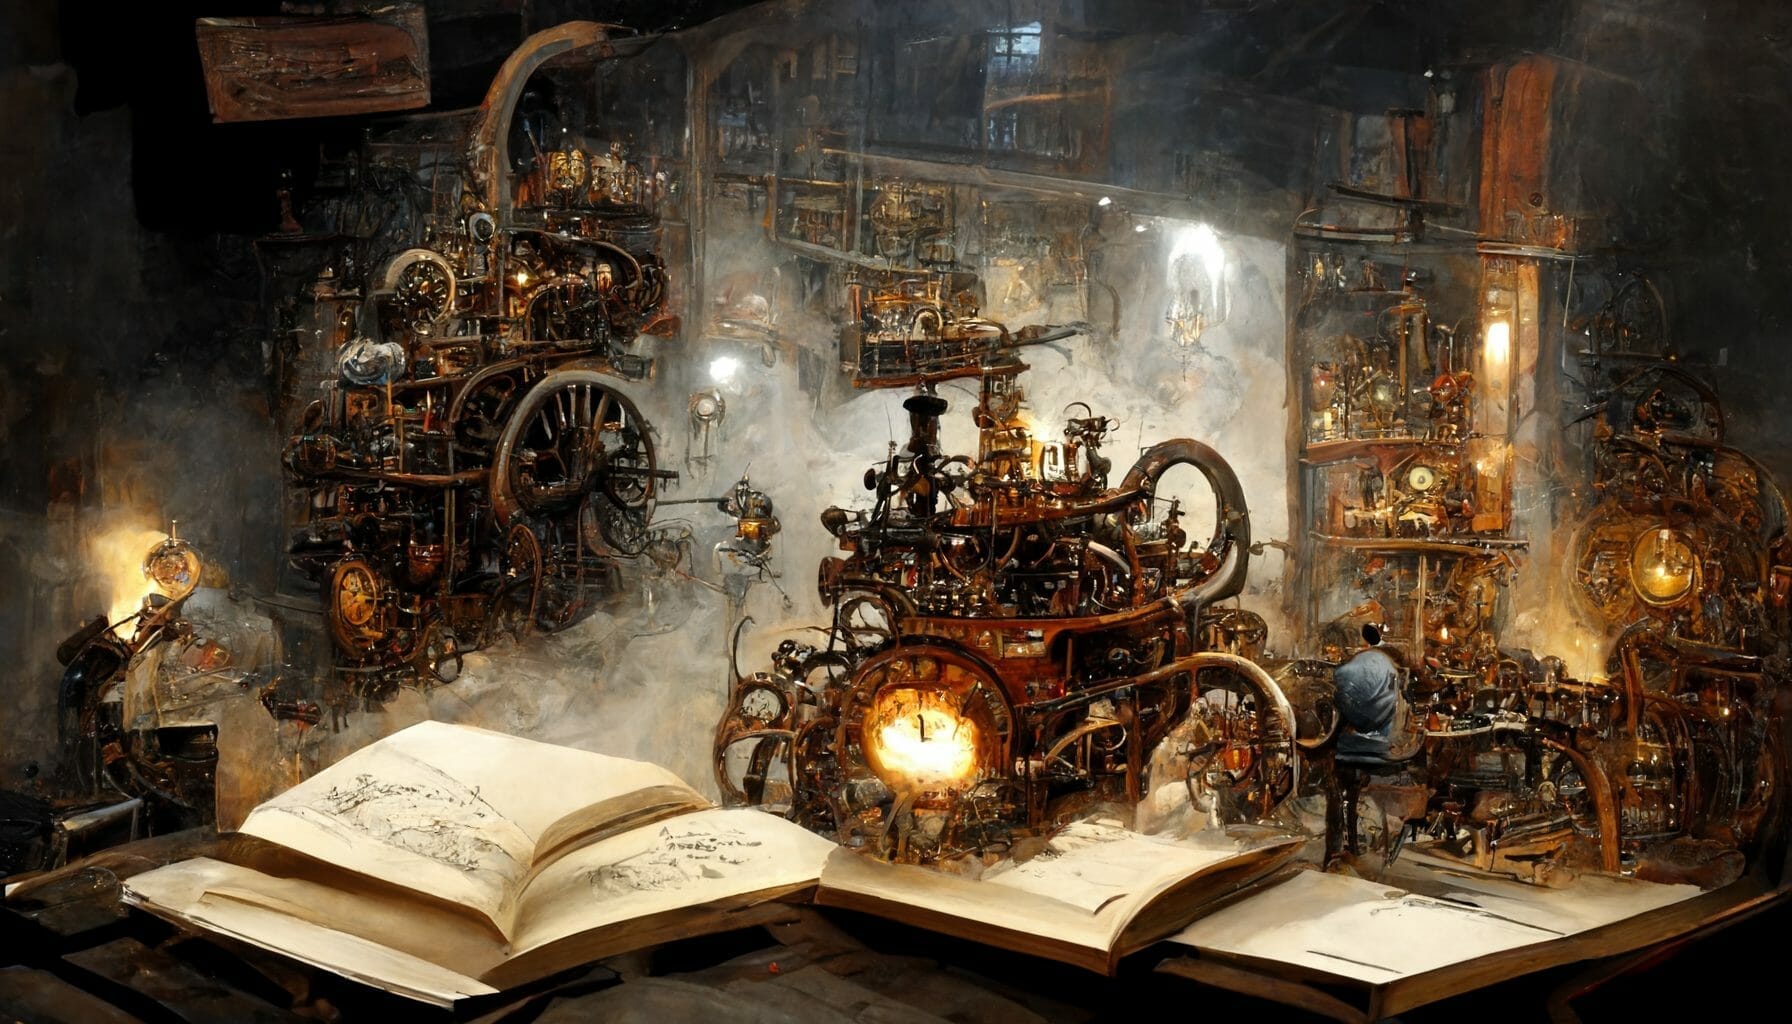 Steampunk machines and books - technology and writing